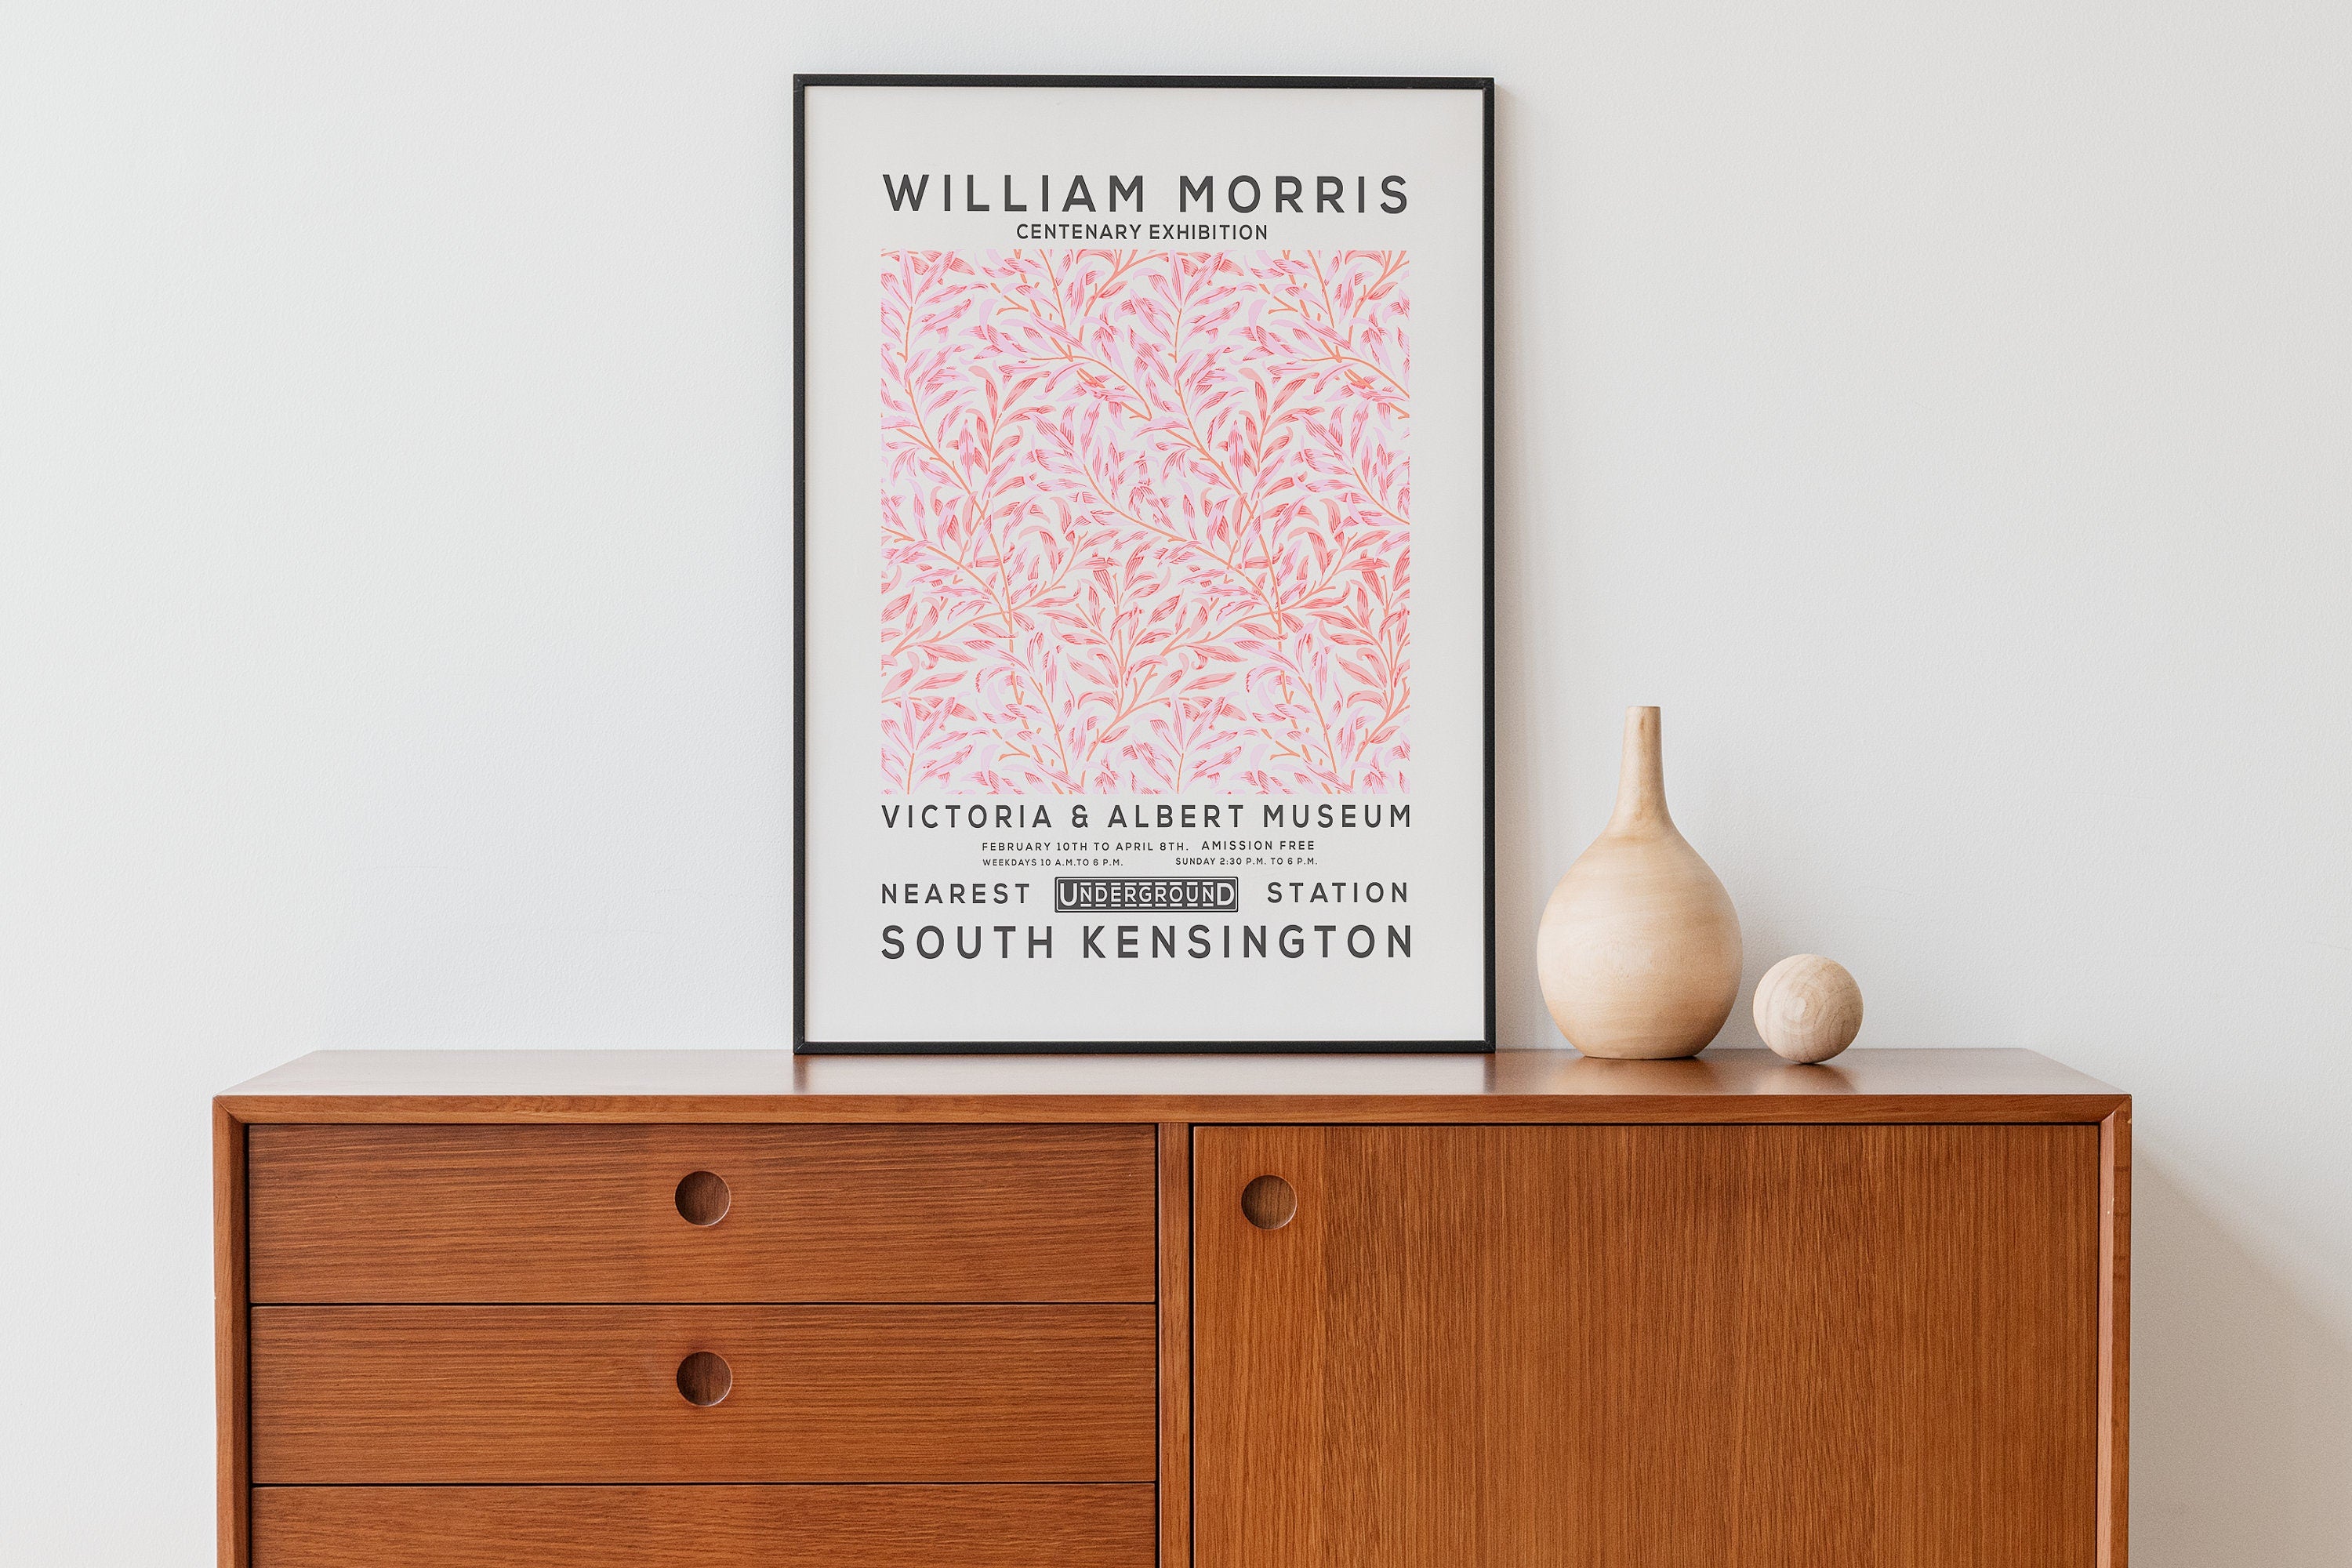 William Morris Print, Vintage Wall Decor, Exhibition Poster, Floral Wall Art, Flower Print, Pink Willow